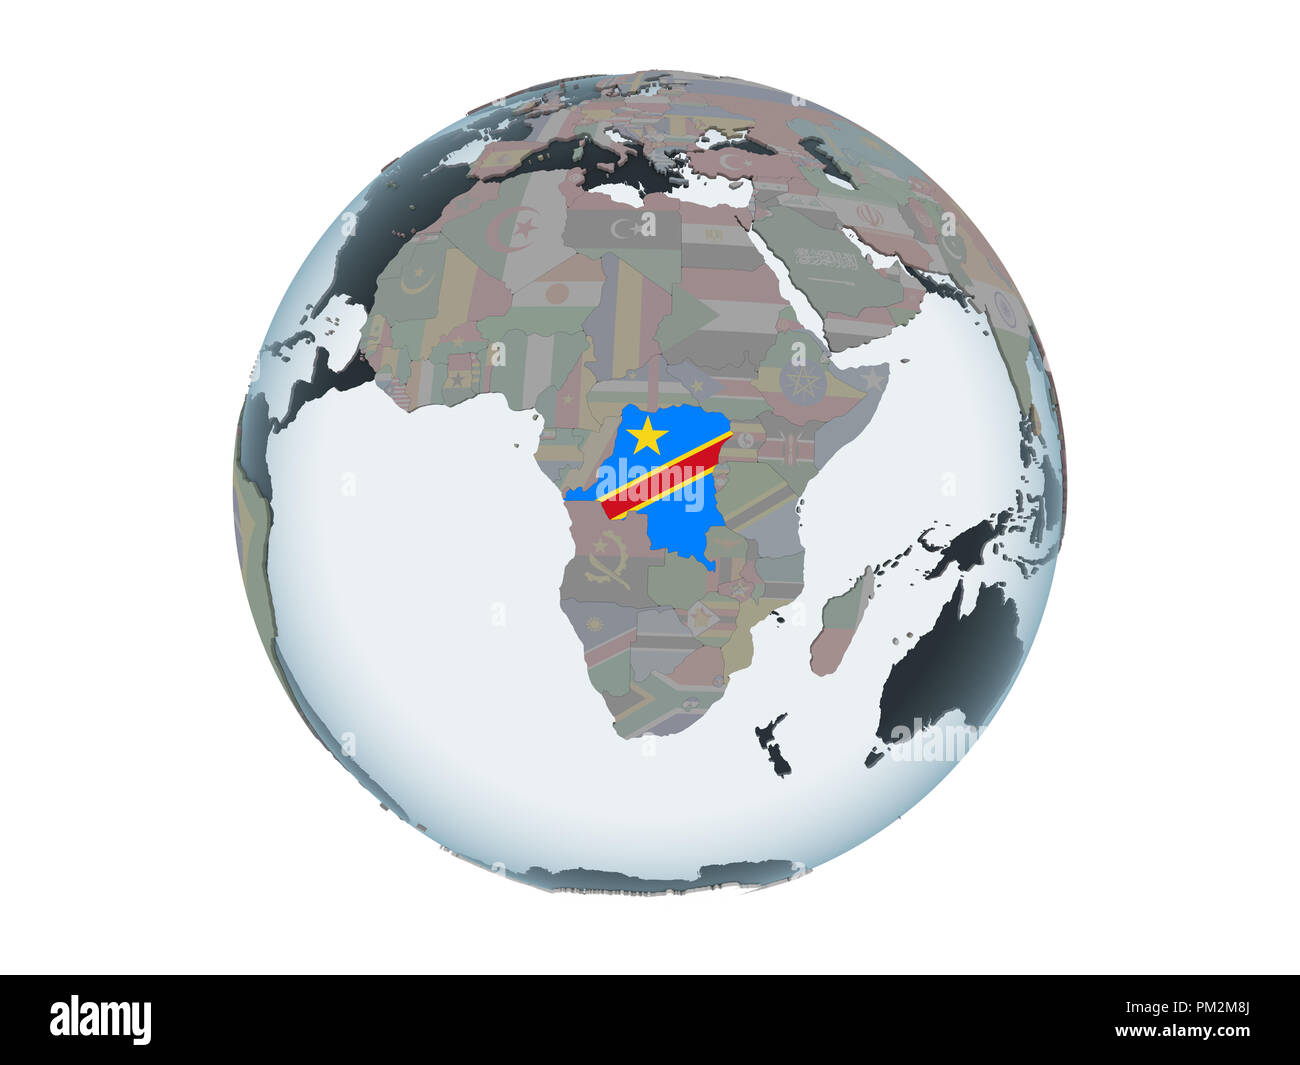 Democratic Republic of Congo on political globe with embedded flag. 3D illustration isolated on white background. Stock Photo